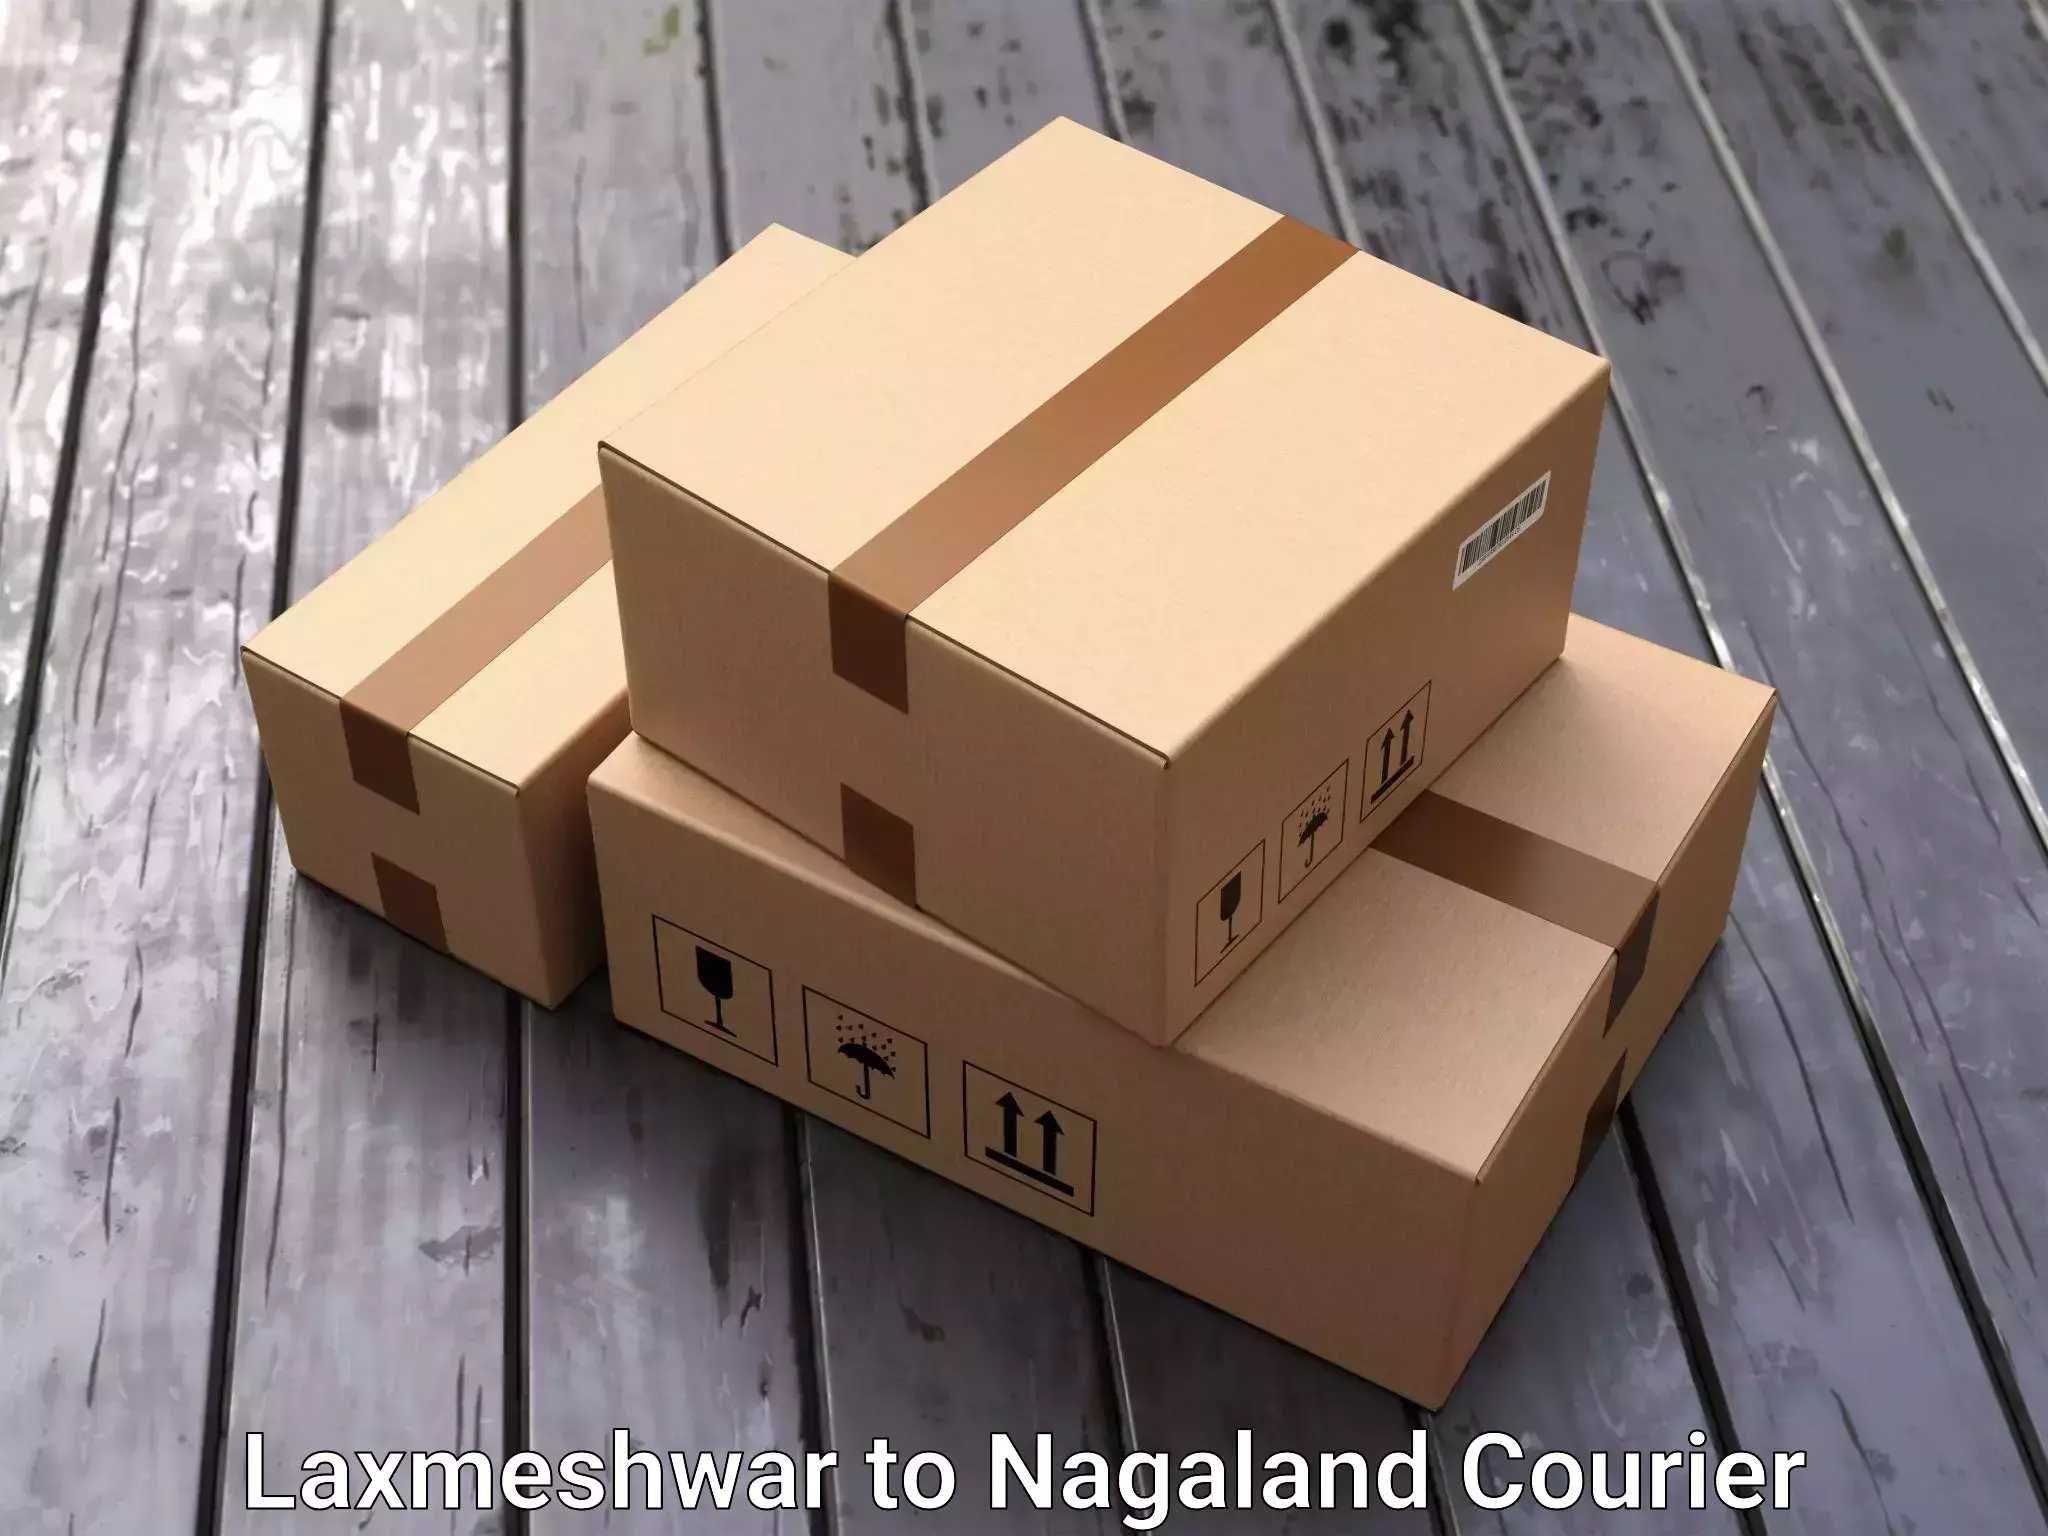 Quality relocation assistance Laxmeshwar to Nagaland